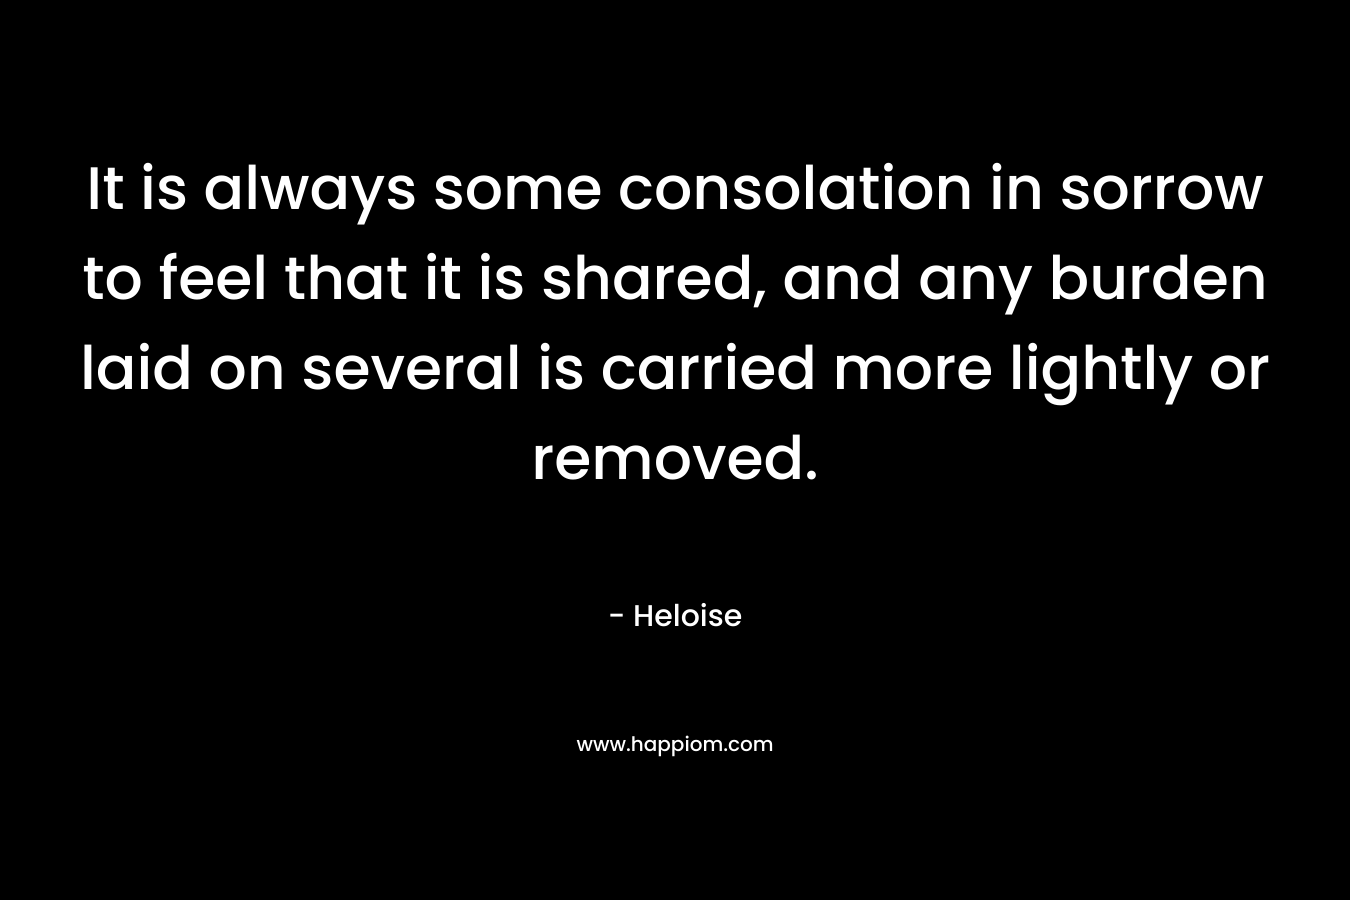 It is always some consolation in sorrow to feel that it is shared, and any burden laid on several is carried more lightly or removed. – Heloise